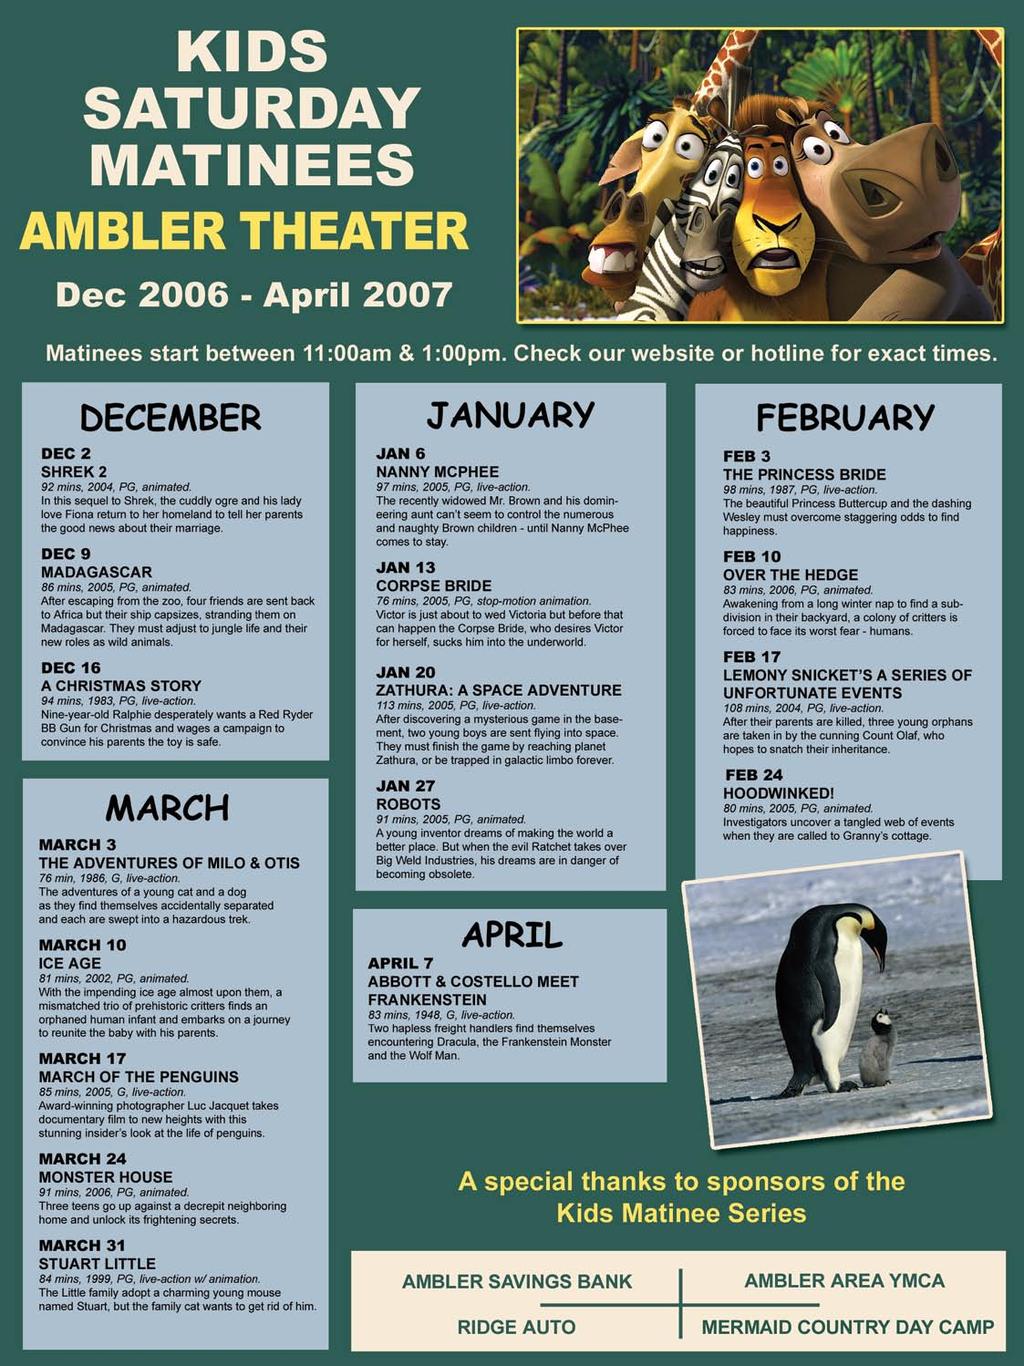 Welcome to the nonprofit Ambler Theater The Ambler Theater is a nonprofit, tax-exempt 501(c)(3) organization. A D M I S S I O N General...$8.00 Members...$4.